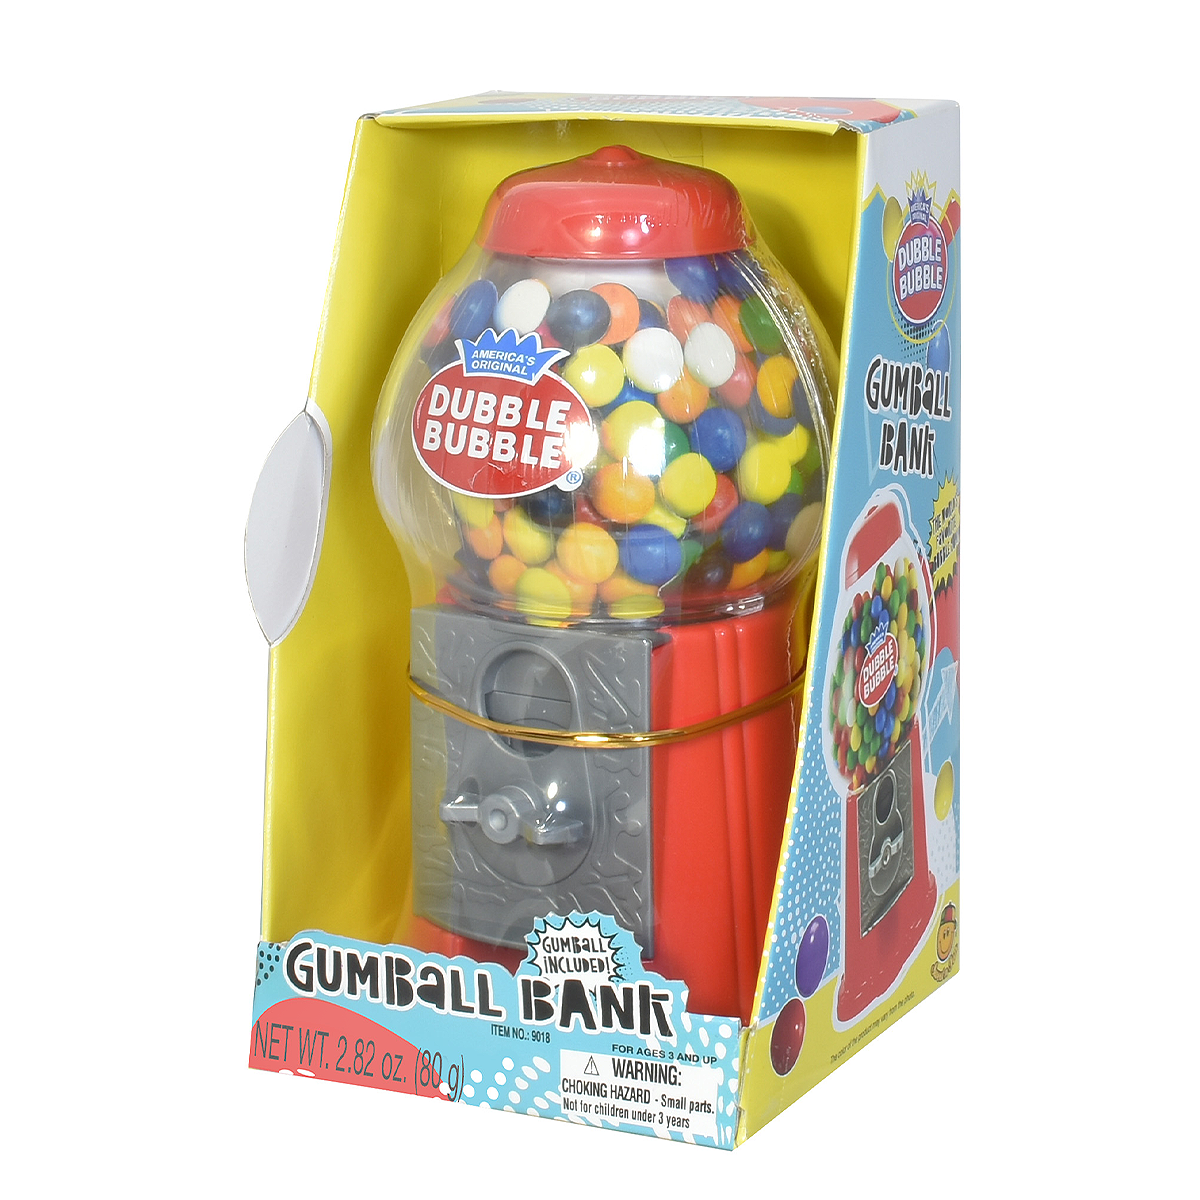 Dubble Bubble Classic Style Gumball Bank - 8.5"